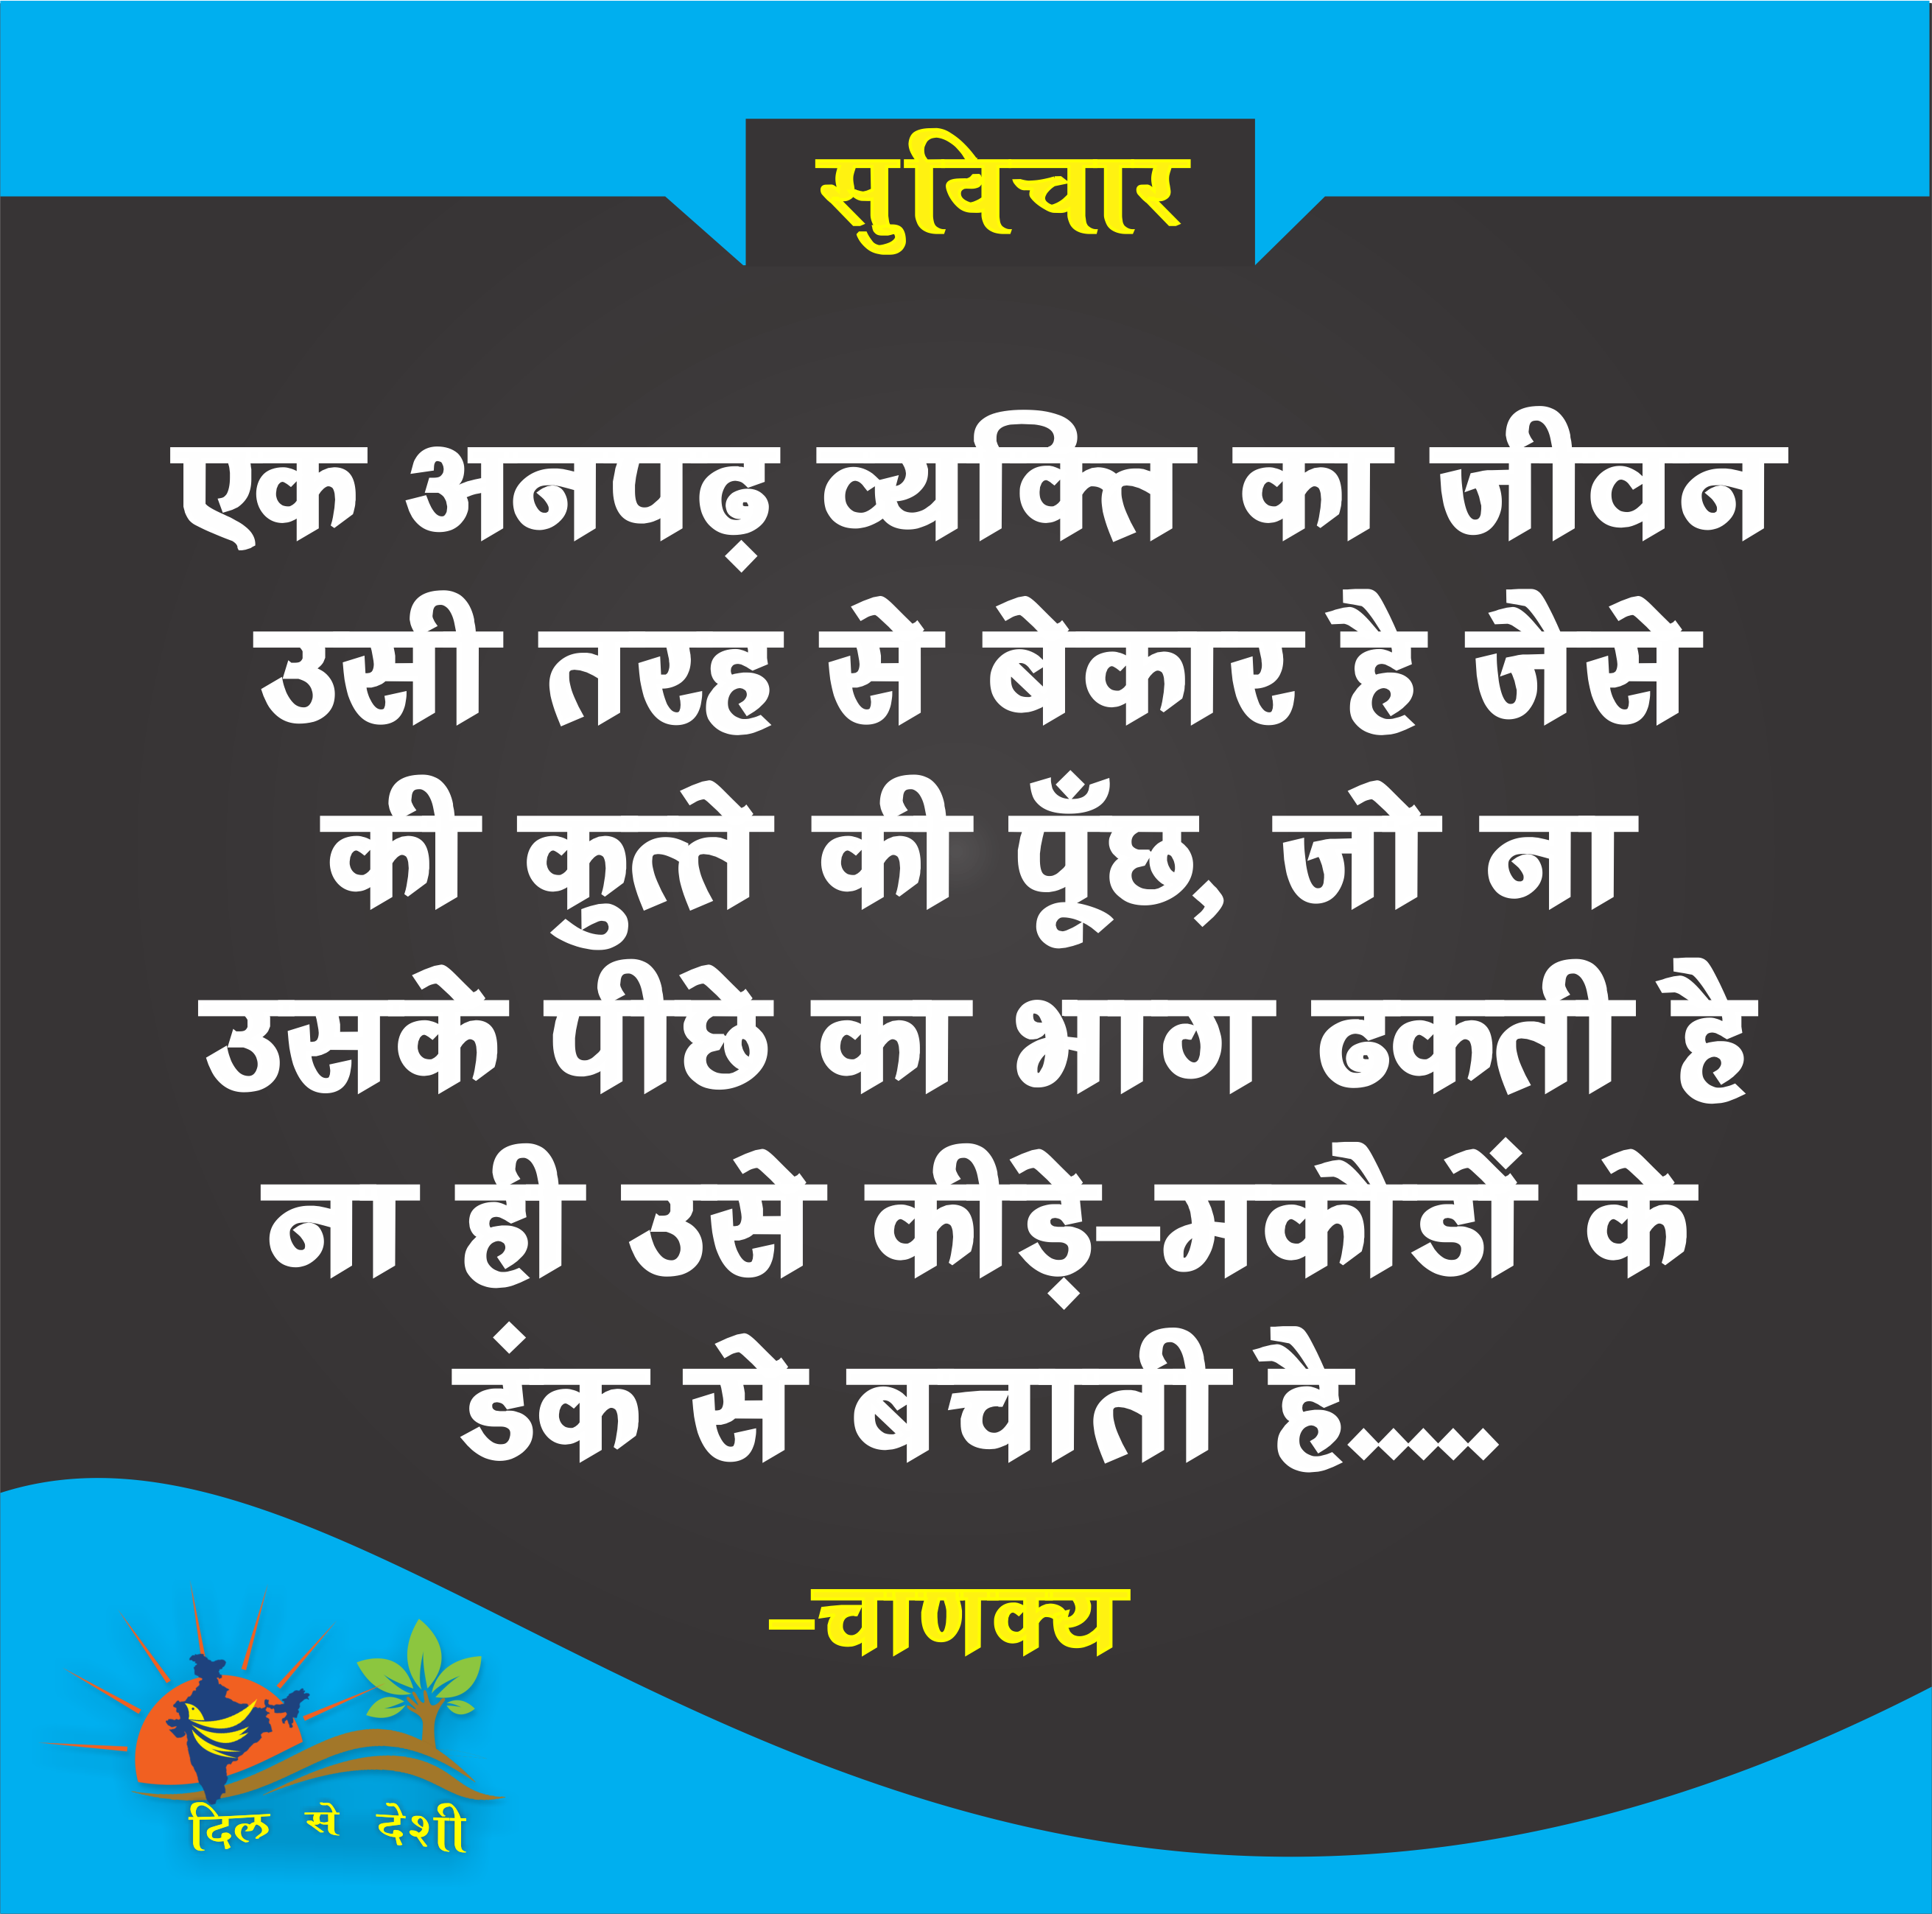 Quotes in Hindi